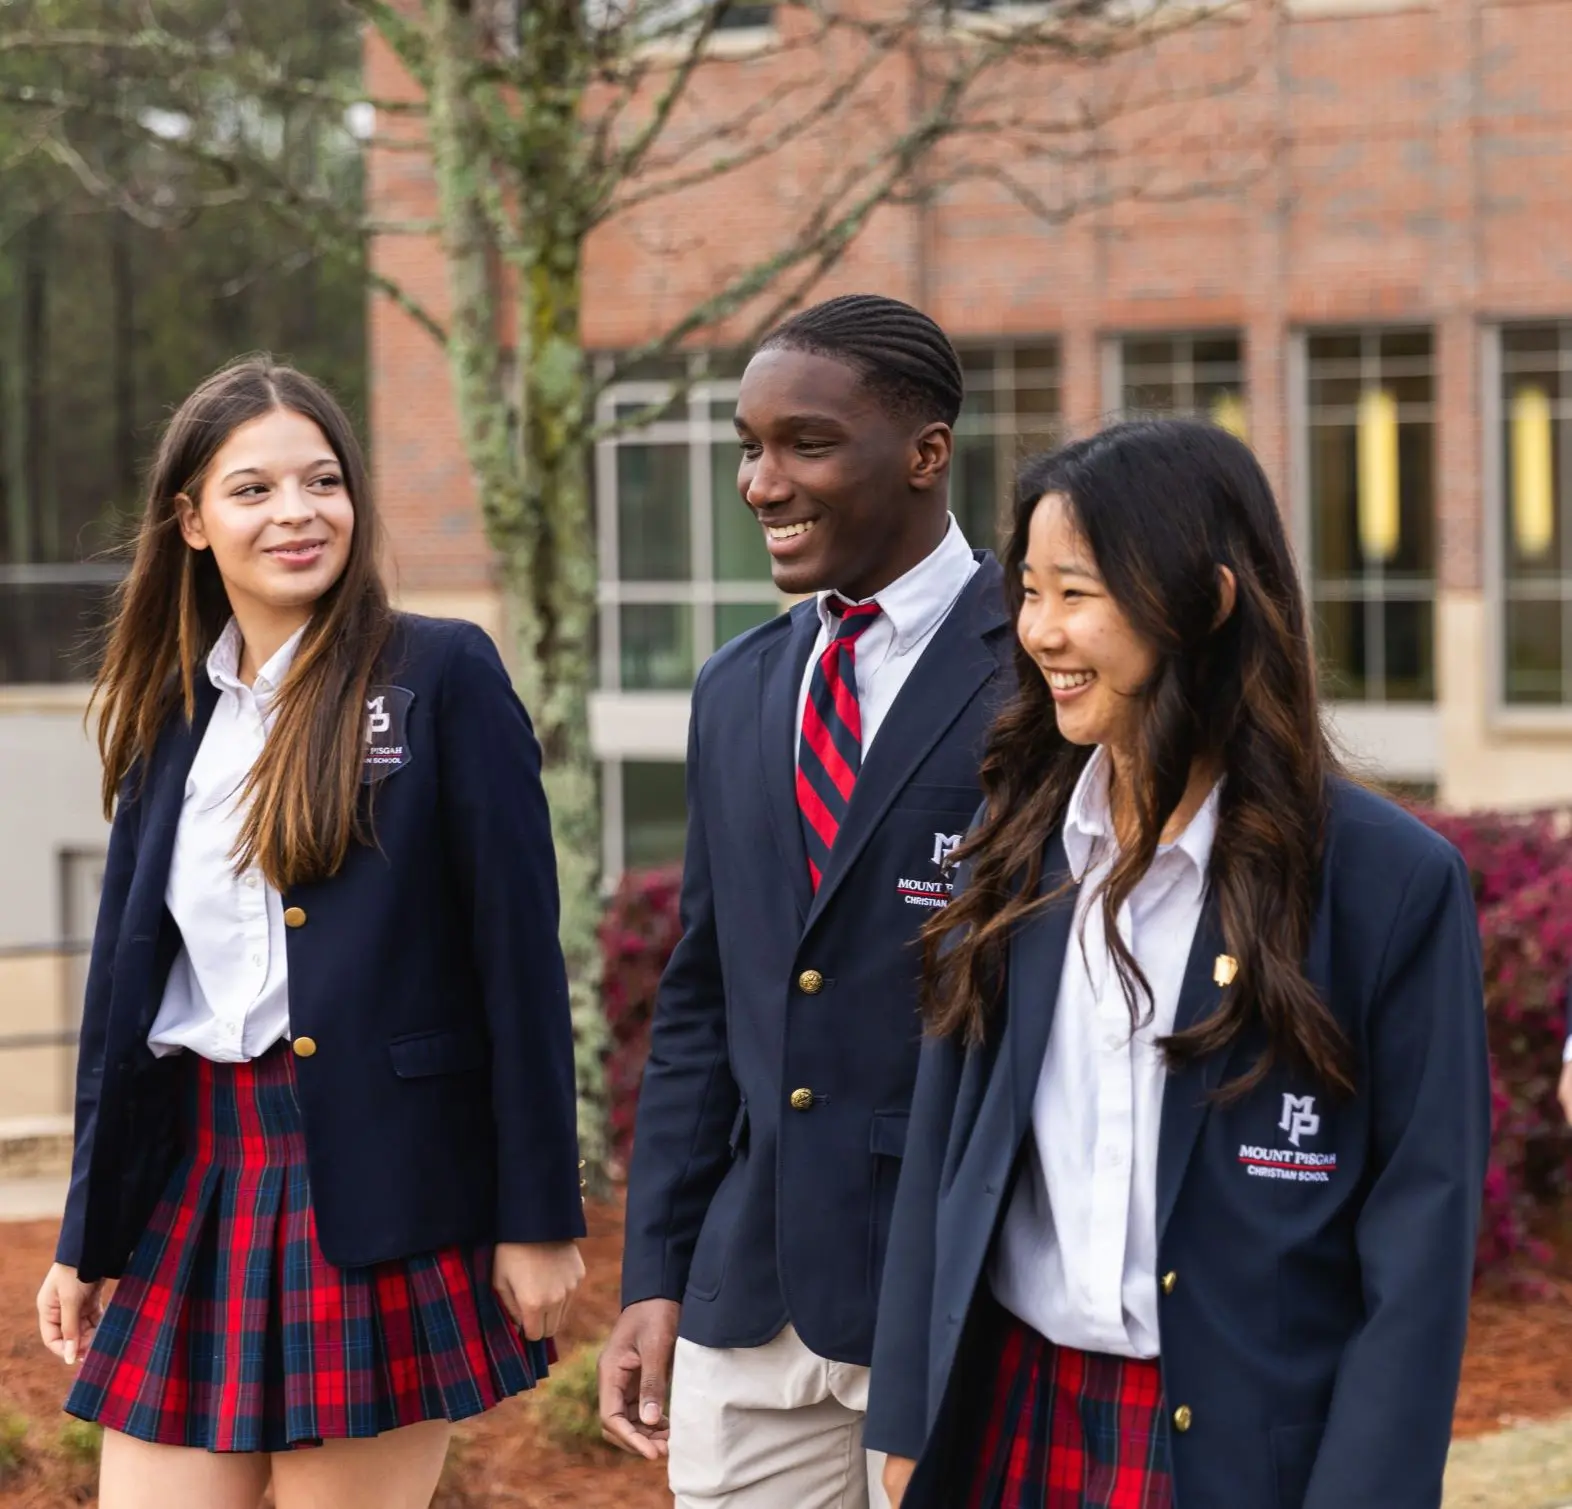 Three students walking outside, smiling